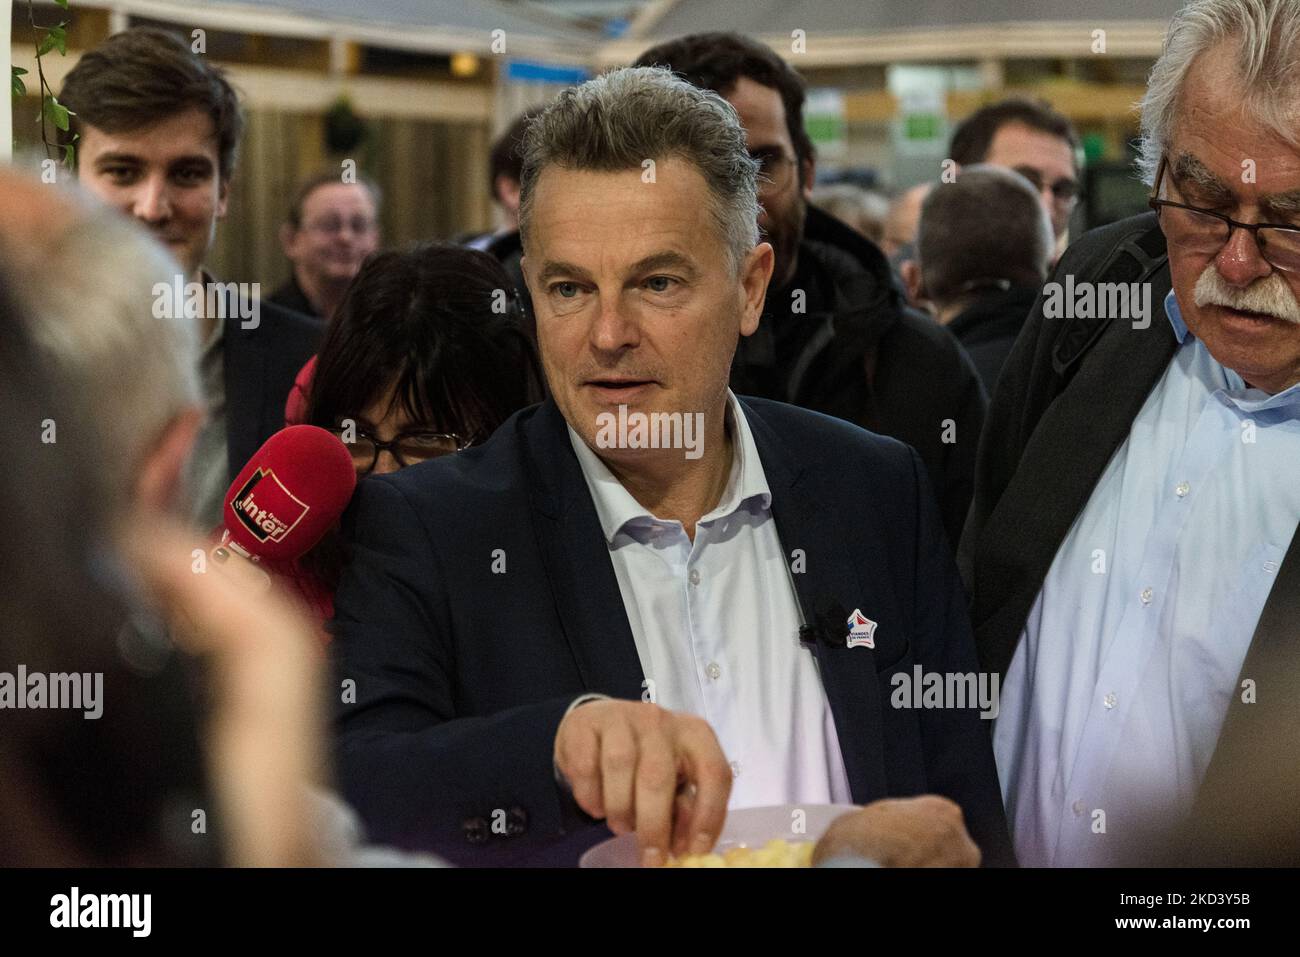 Fabien Roussel, candidate for the French Communist Party (PCF) in the French presidential election, talks with a cheese exhibitor during the traditional visit of the presidential candidates to the International Agricultural Show currently being held at the Parc des Exposition de la Porte de Versailles in Paris on February 28, 2022. (Photo by Samuel Boivin/NurPhoto) Stock Photo